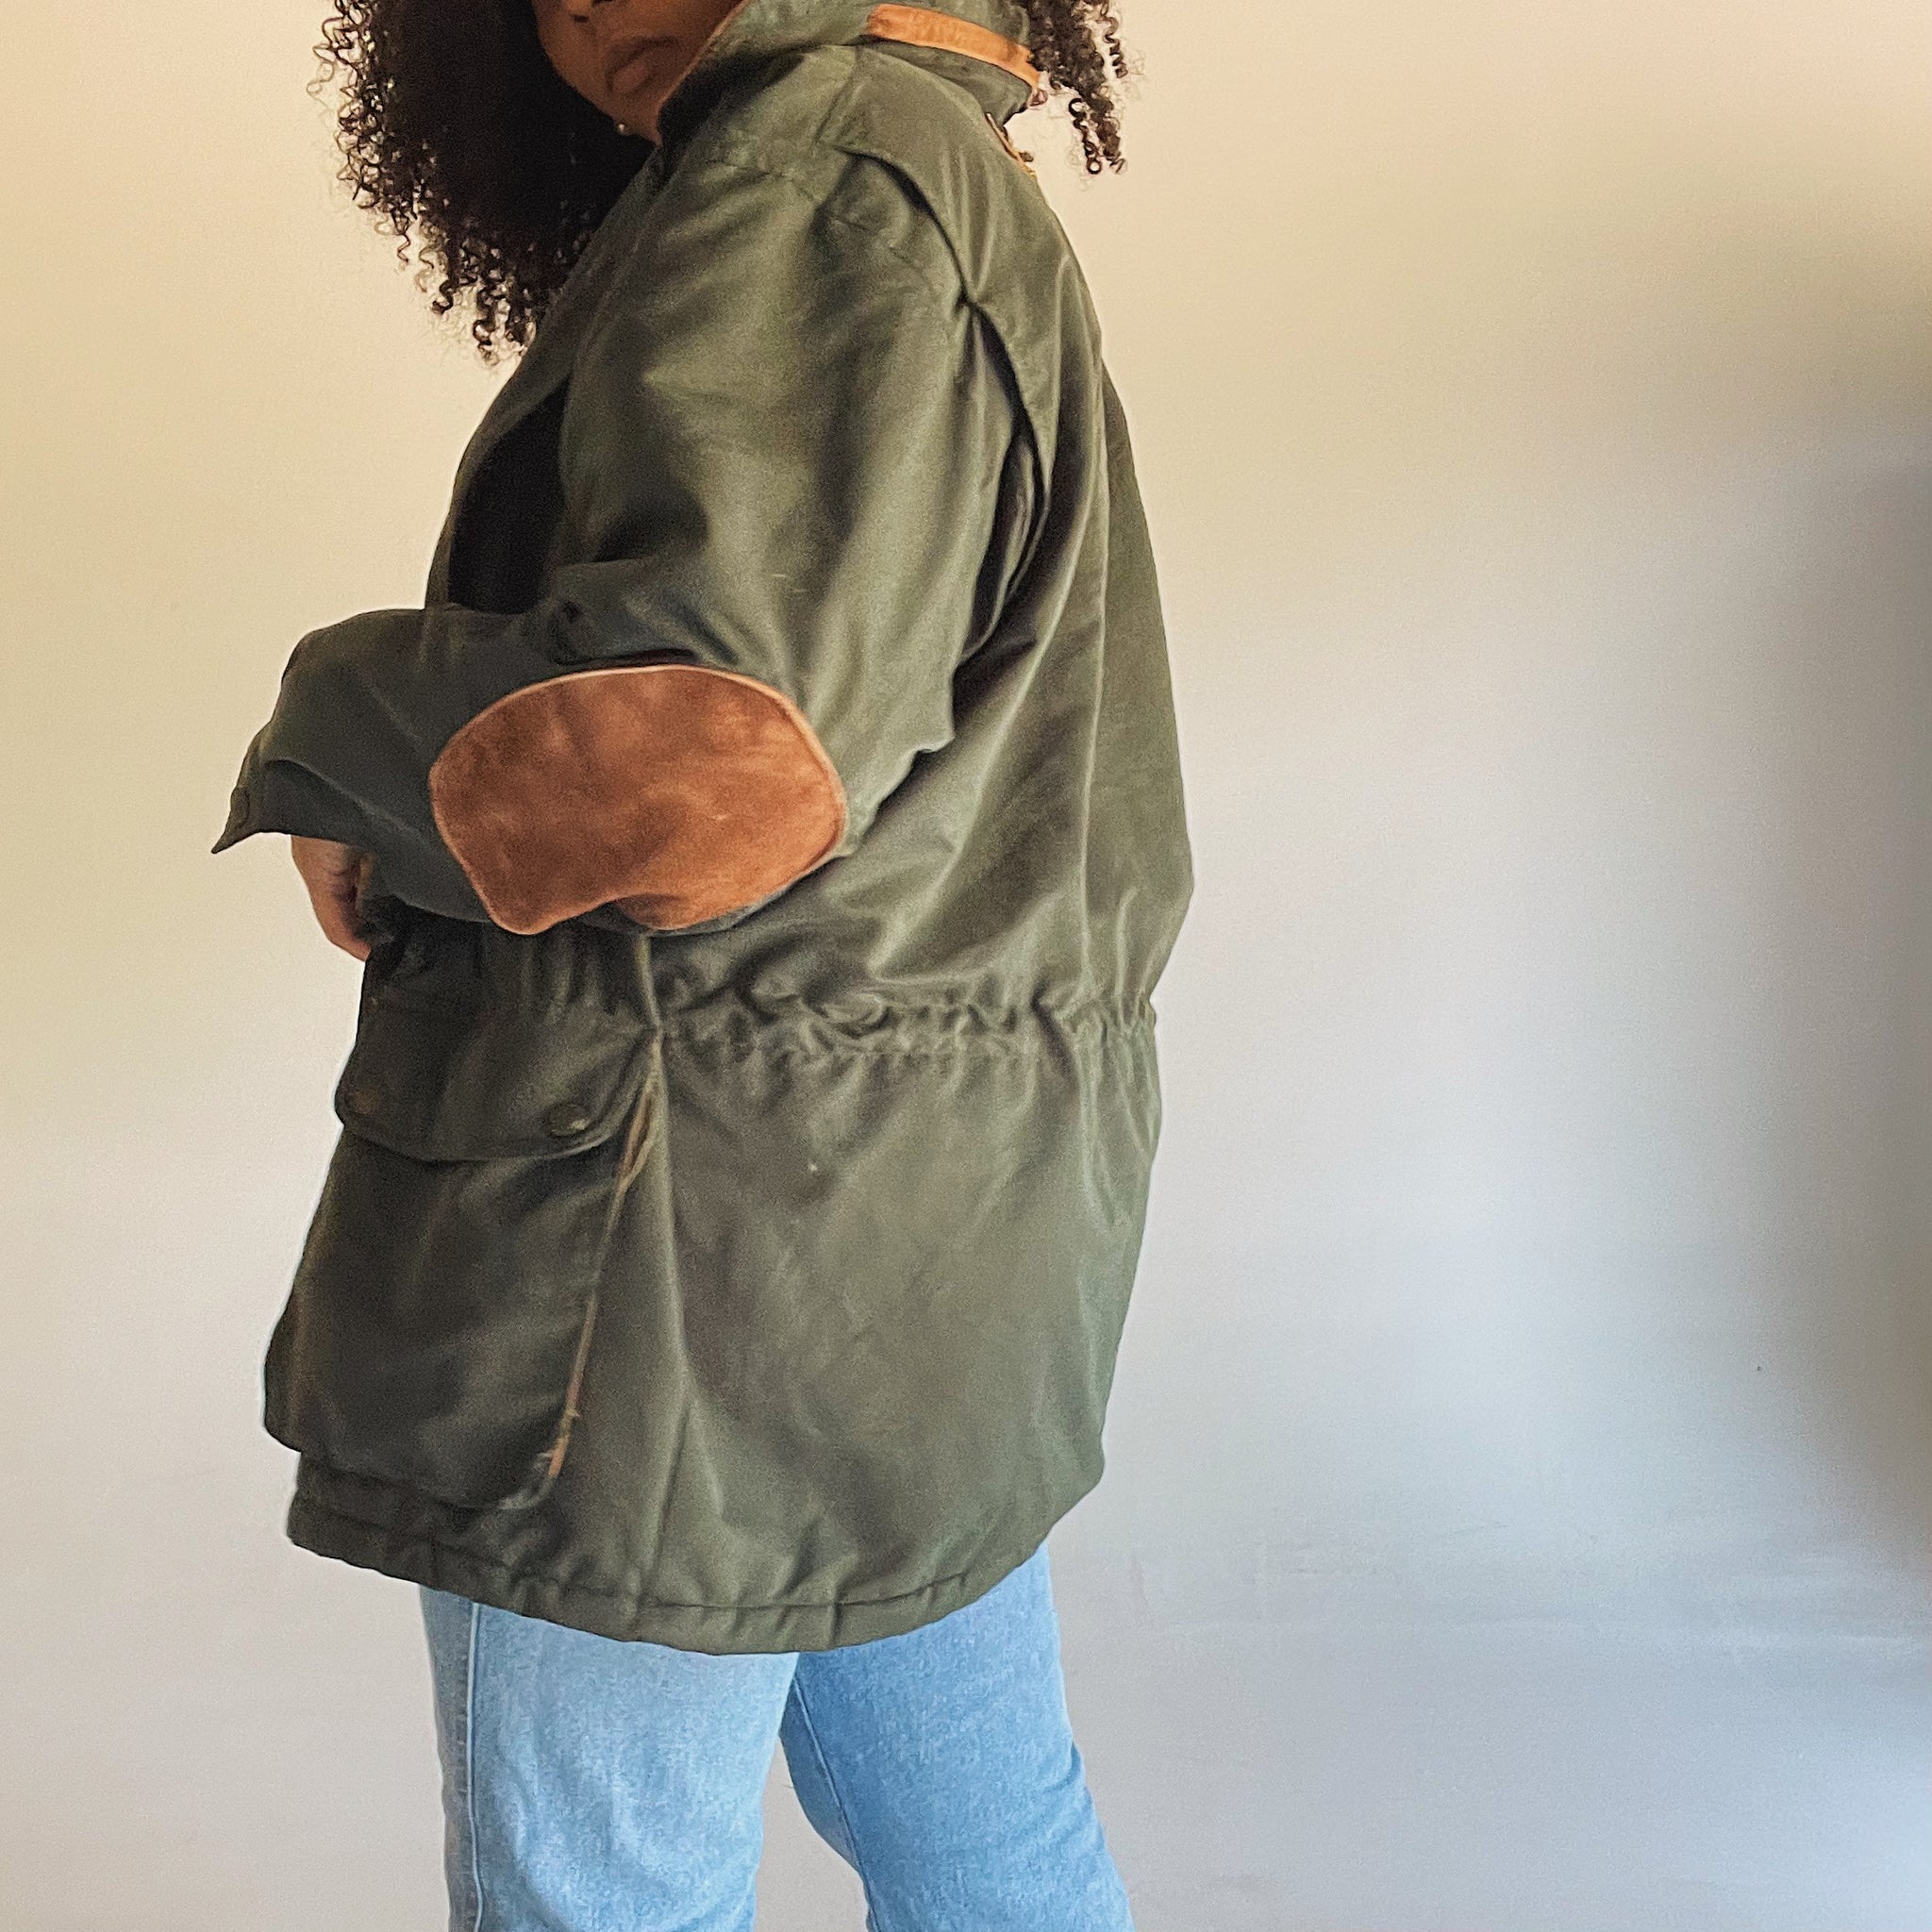 Green Utility Jacket with Faux Suede Elbow Patches (L-XXL)